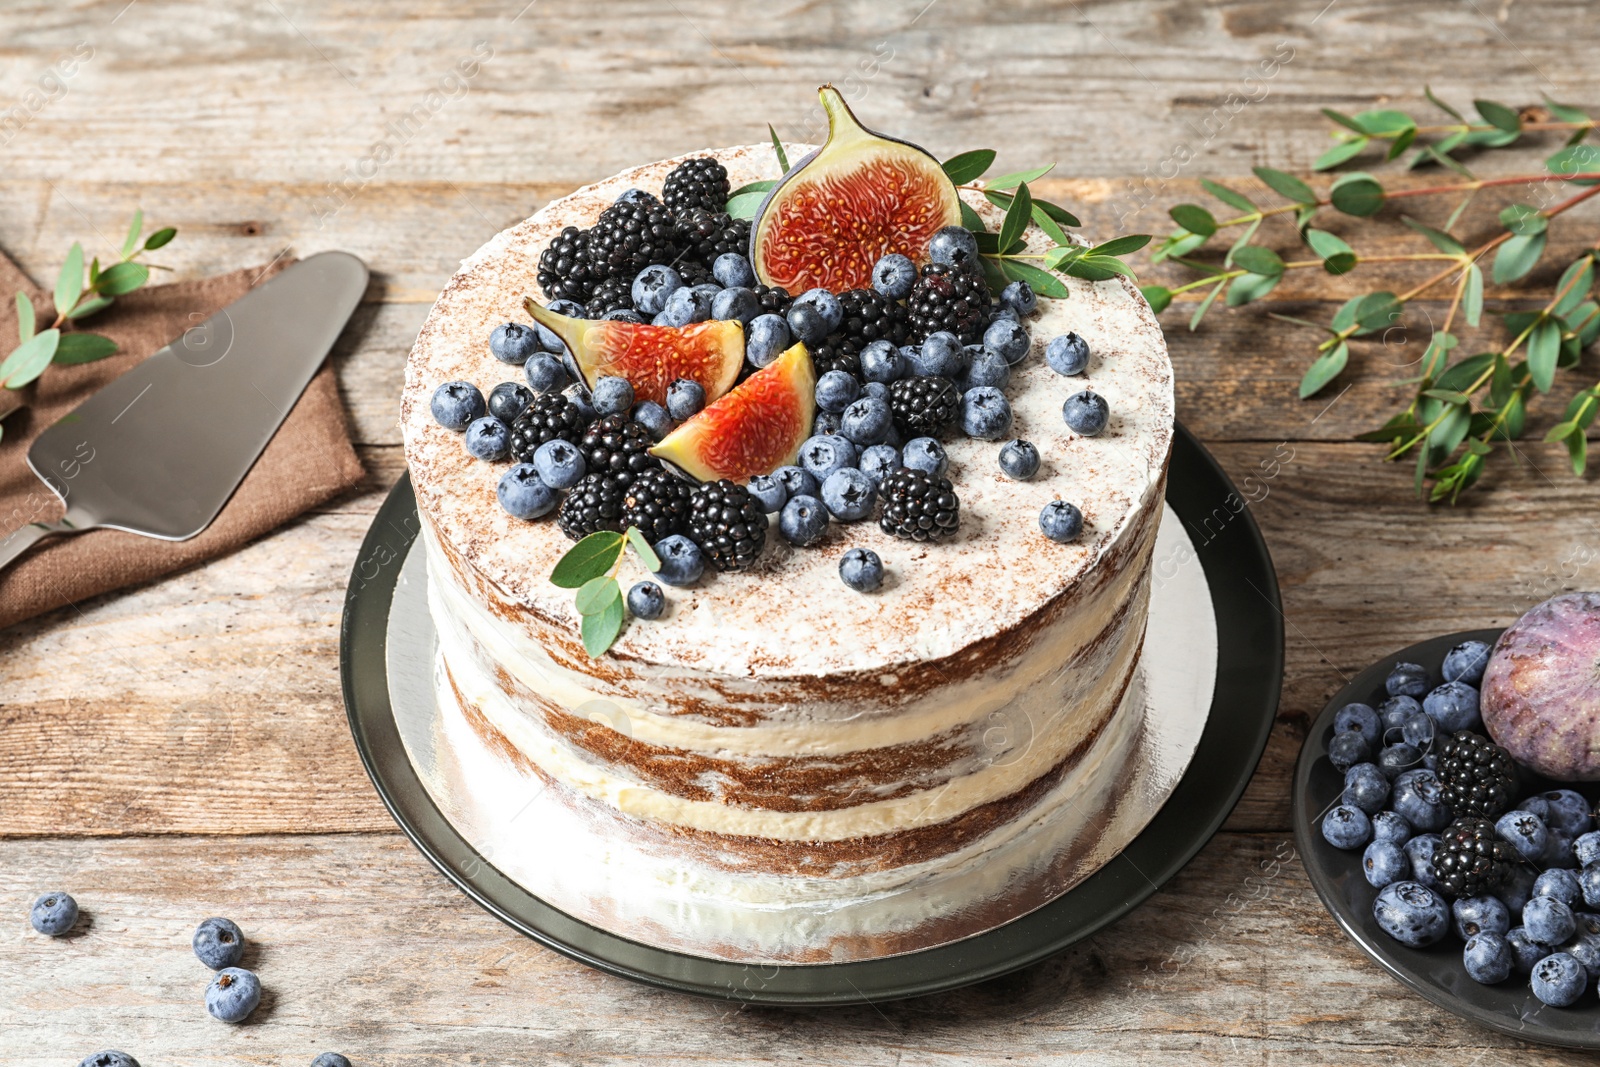 Photo of Delicious homemade cake with fresh berries served on wooden table